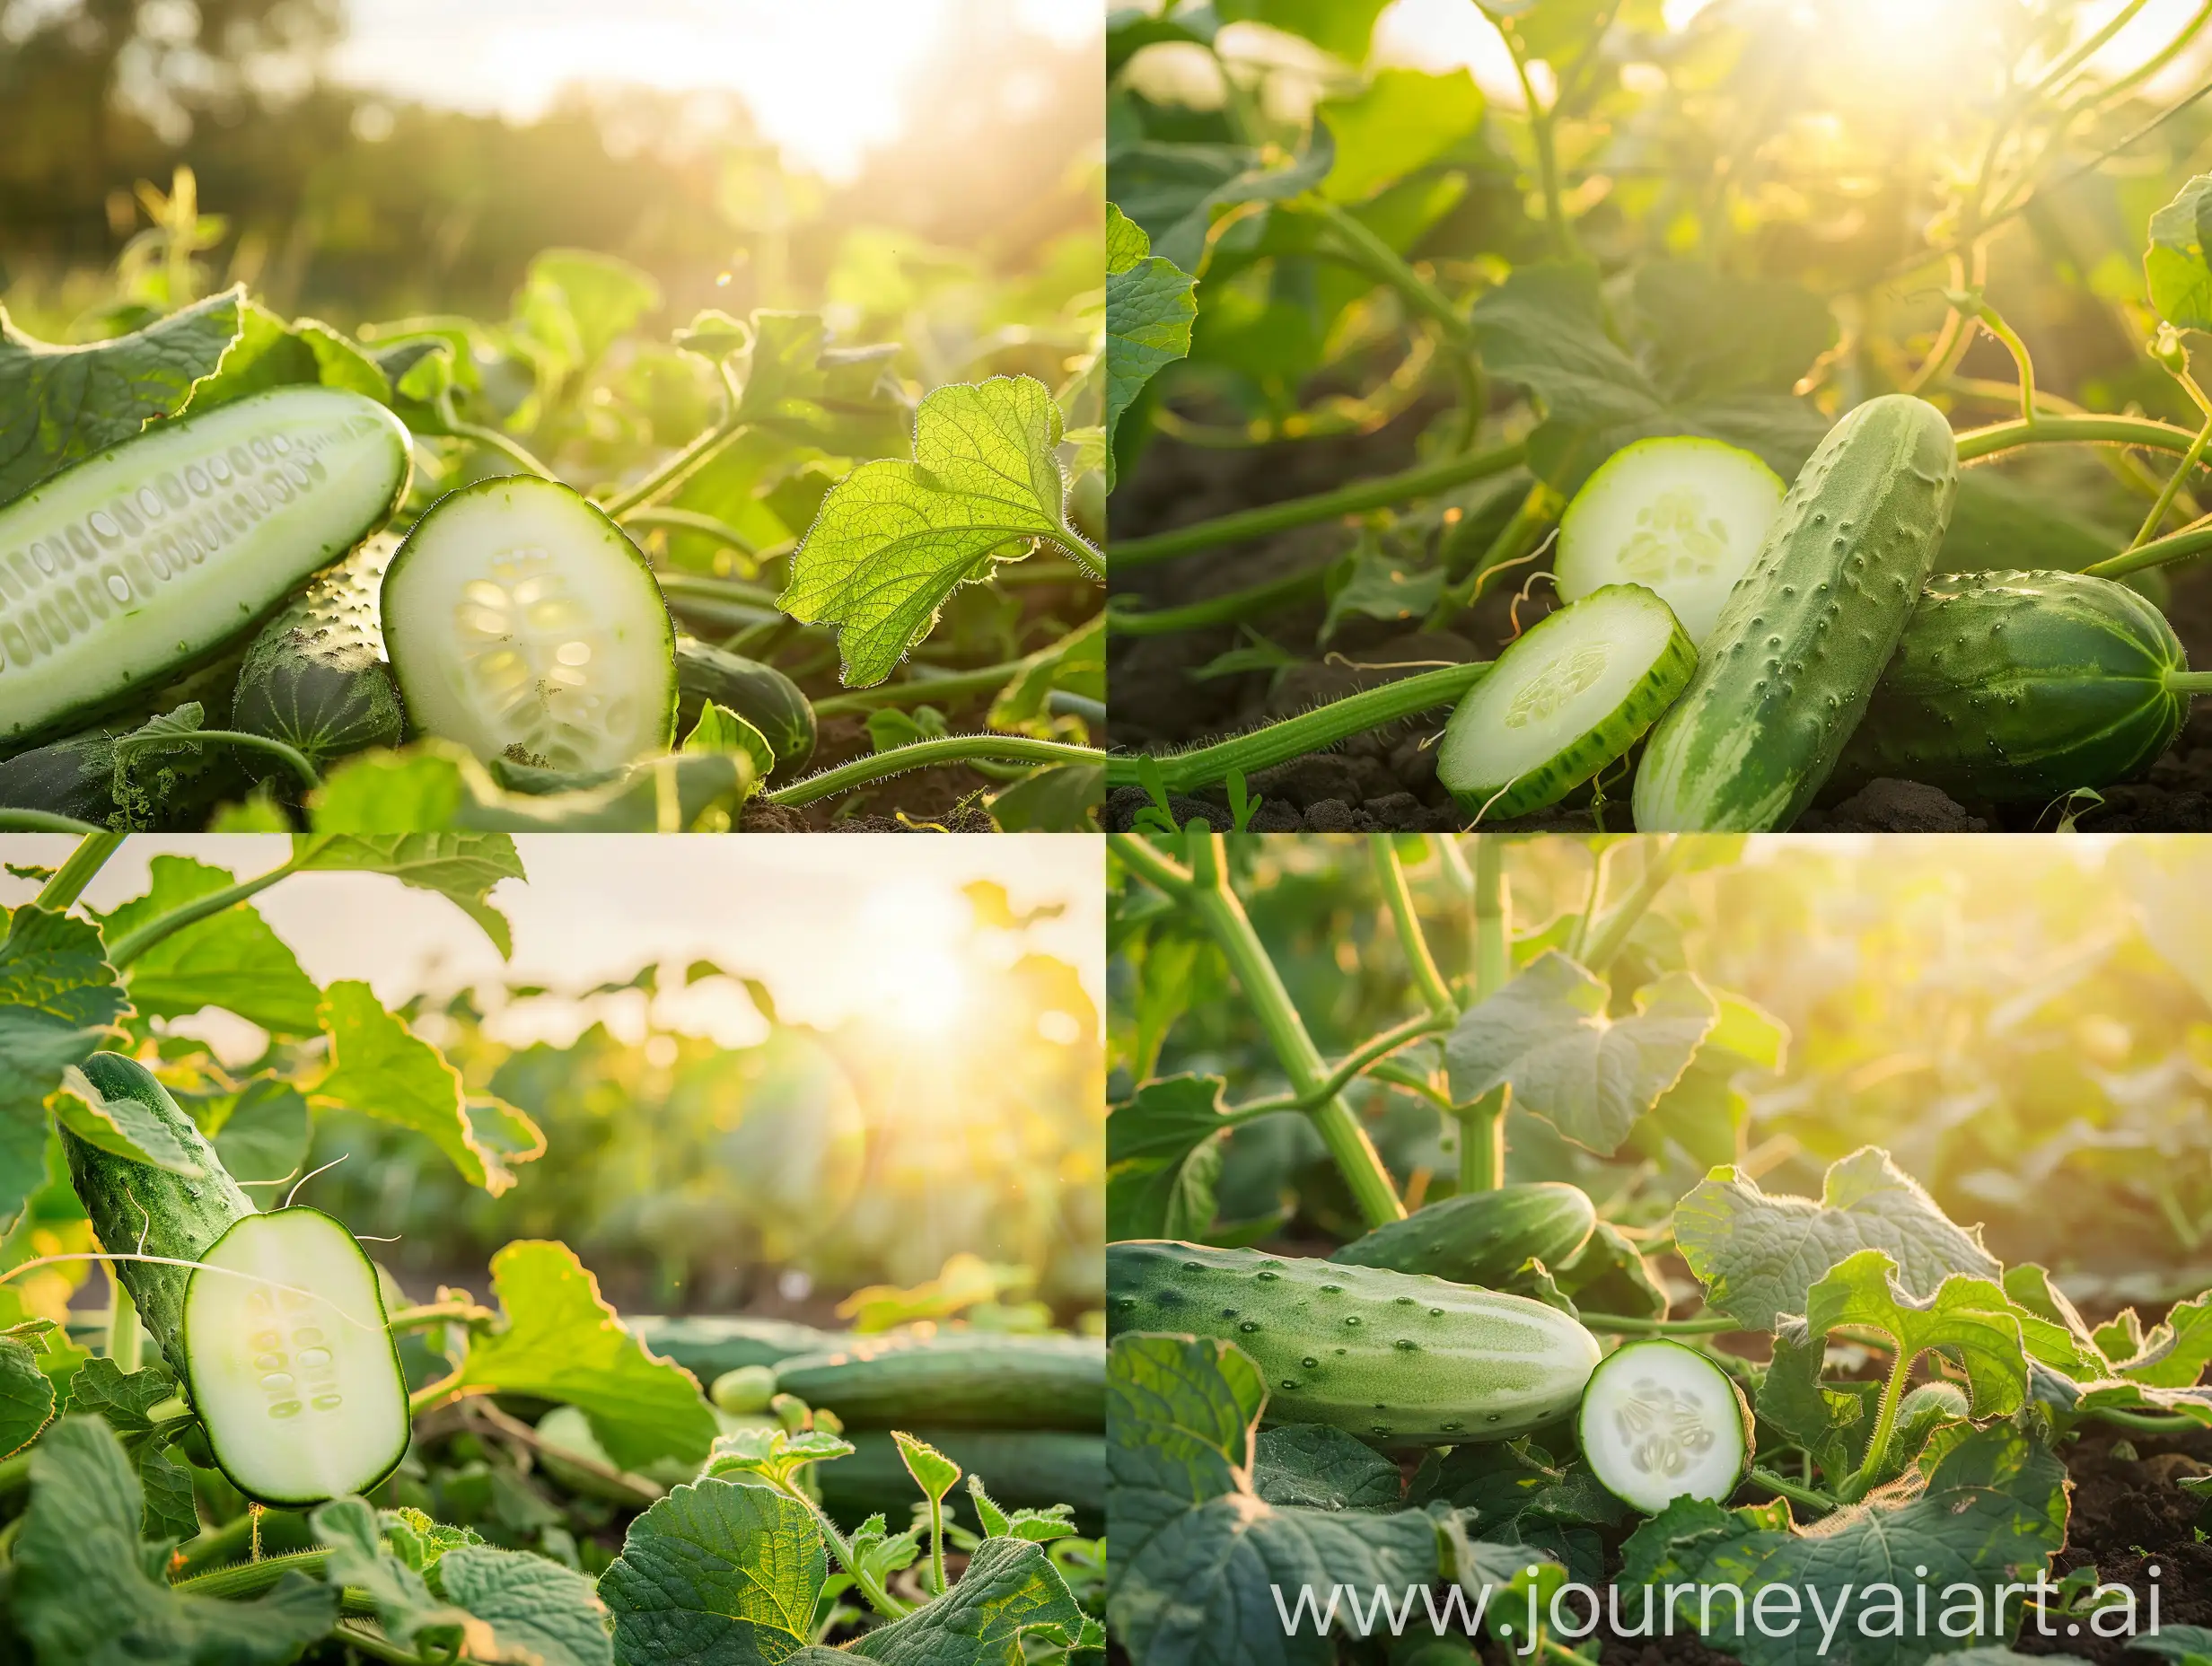 High detailed photo capturing a Cucumber, Burpless Beauty. The sun, casting a warm, golden glow, bathes the scene in a serene ambiance, illuminating the intricate details of each element. The composition centers on a Cucumber, Burpless Beauty. The super-productive vines yield loads of long, deep green cucumbers that stay crisp longer than any other weve tried. Pick and slice to reveal the pure white, firm flesh with an exceptionally small seed cavity. The thin-skinned cukes have the right balan. The image evokes a sense of tranquility and natural beauty, inviting viewers to immerse themselves in the splendor of the landscape. --ar 16:9 